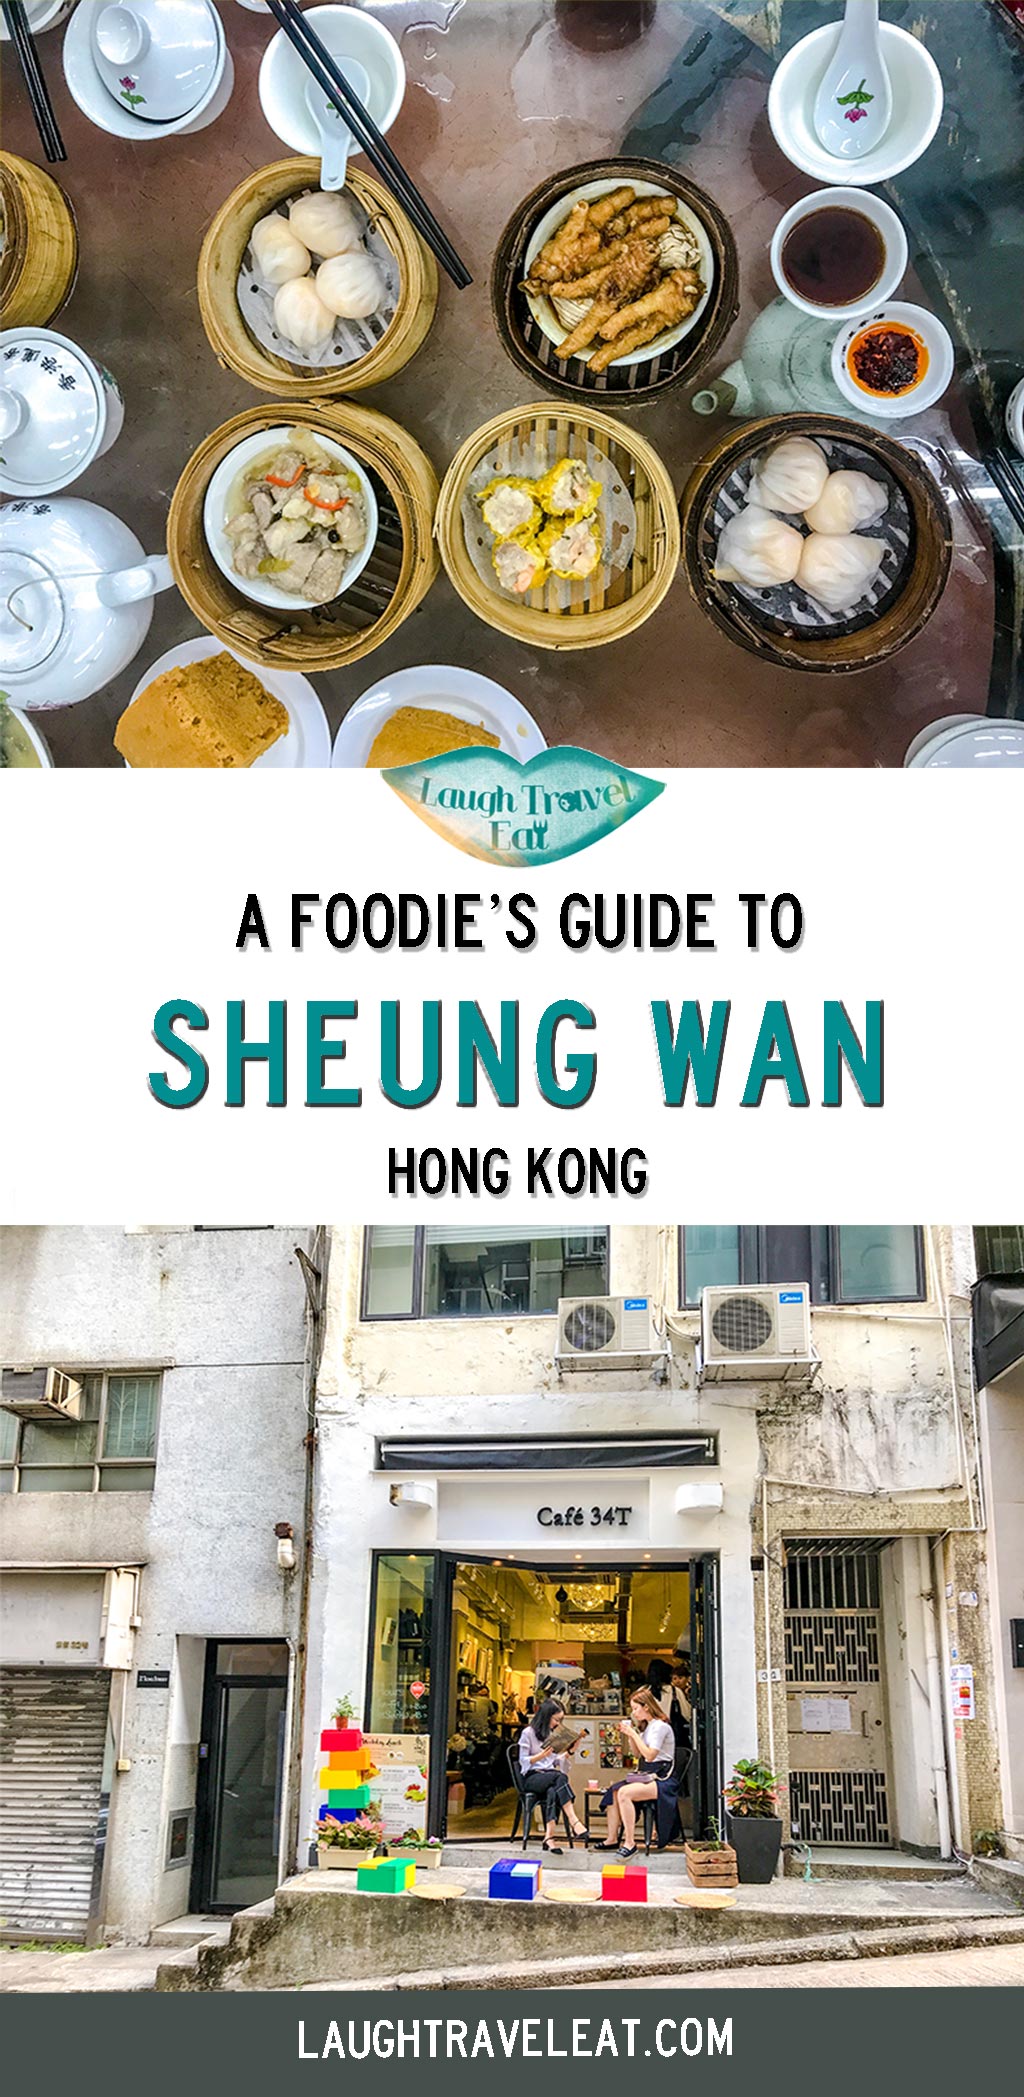 Sheung Wan has a wide range of restaurants and cafes that would take you weeks, nay, months, to discover. But lucky for you, I have spent a fair amount of time eating around the neighbourhood. This is an extension of my favourite restaurants in Hong Kong guide, specifically focused on Sheung Wan. #SheungWan #HongKong #Food #restaurants